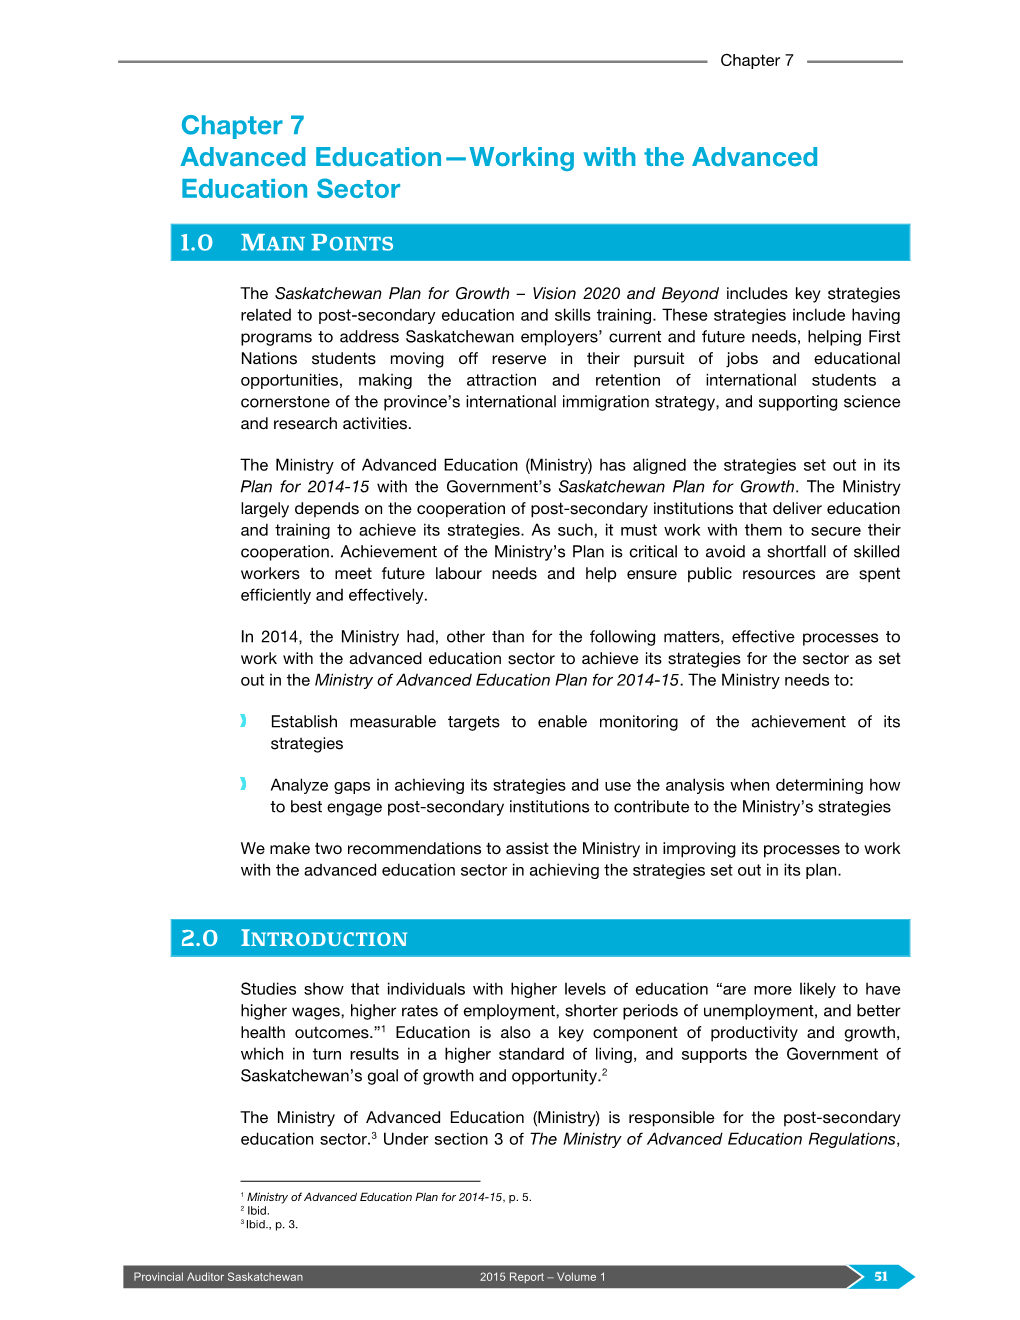 7 Advanced Education—Working with the Advanced Education Sector